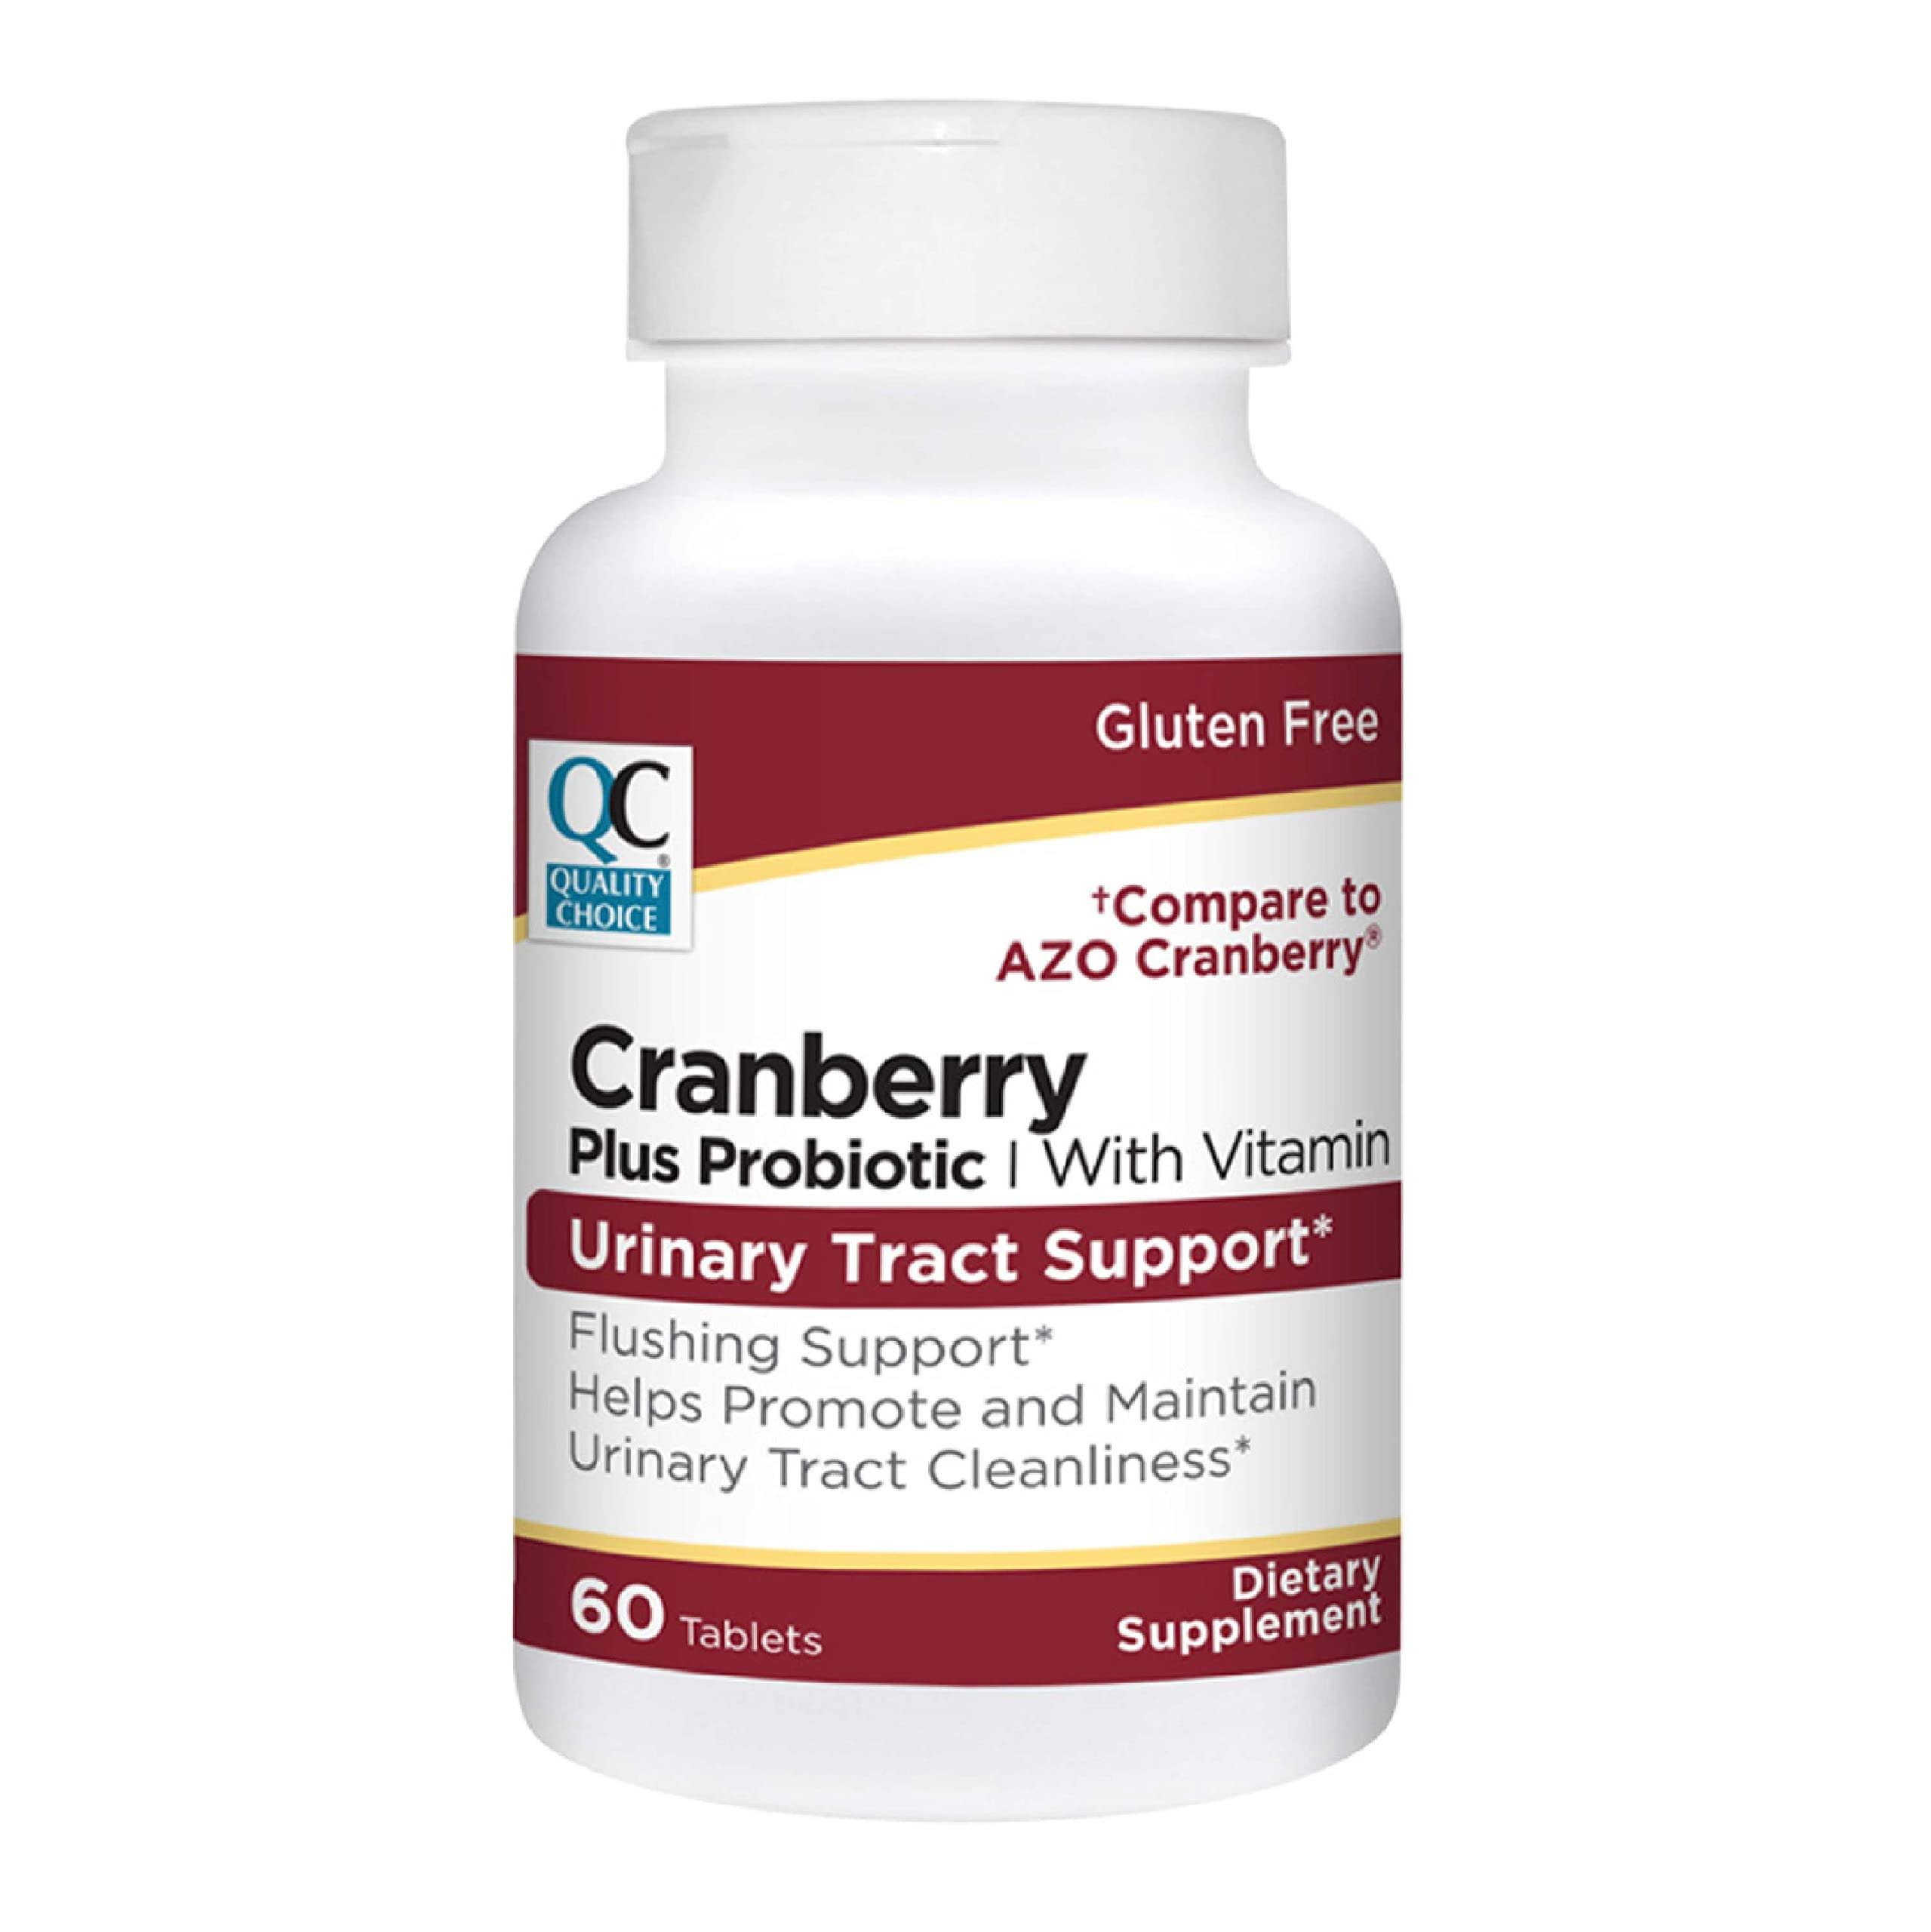 Quality Choice Cranberry Plus Probiotic with Vitamin C Urinary Tract Support Tablets 60 Count